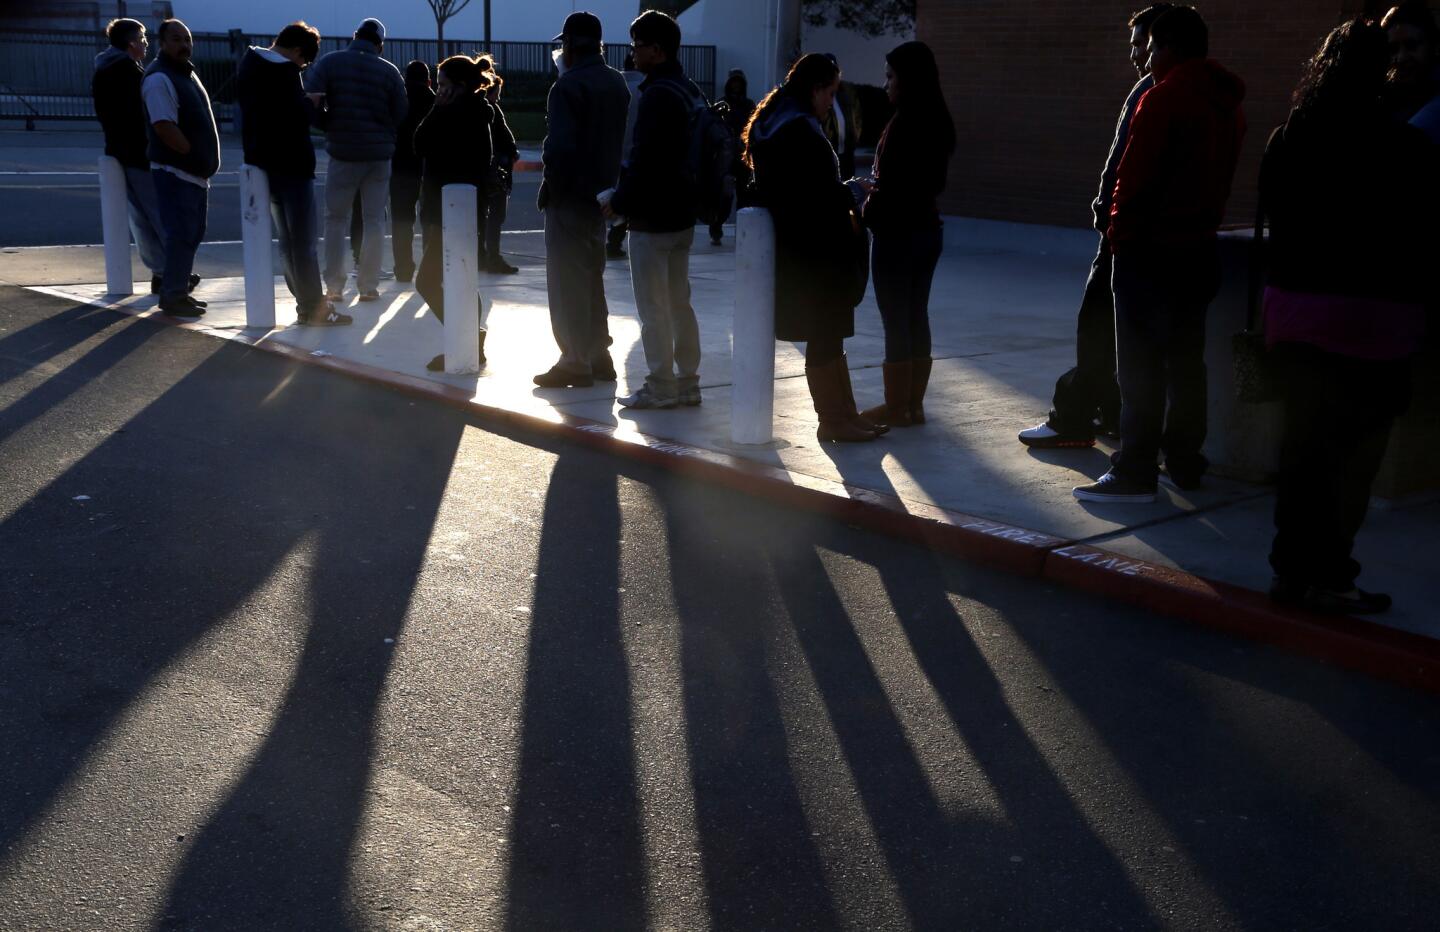 People stand in the cold at the Santa Ana DMV office.